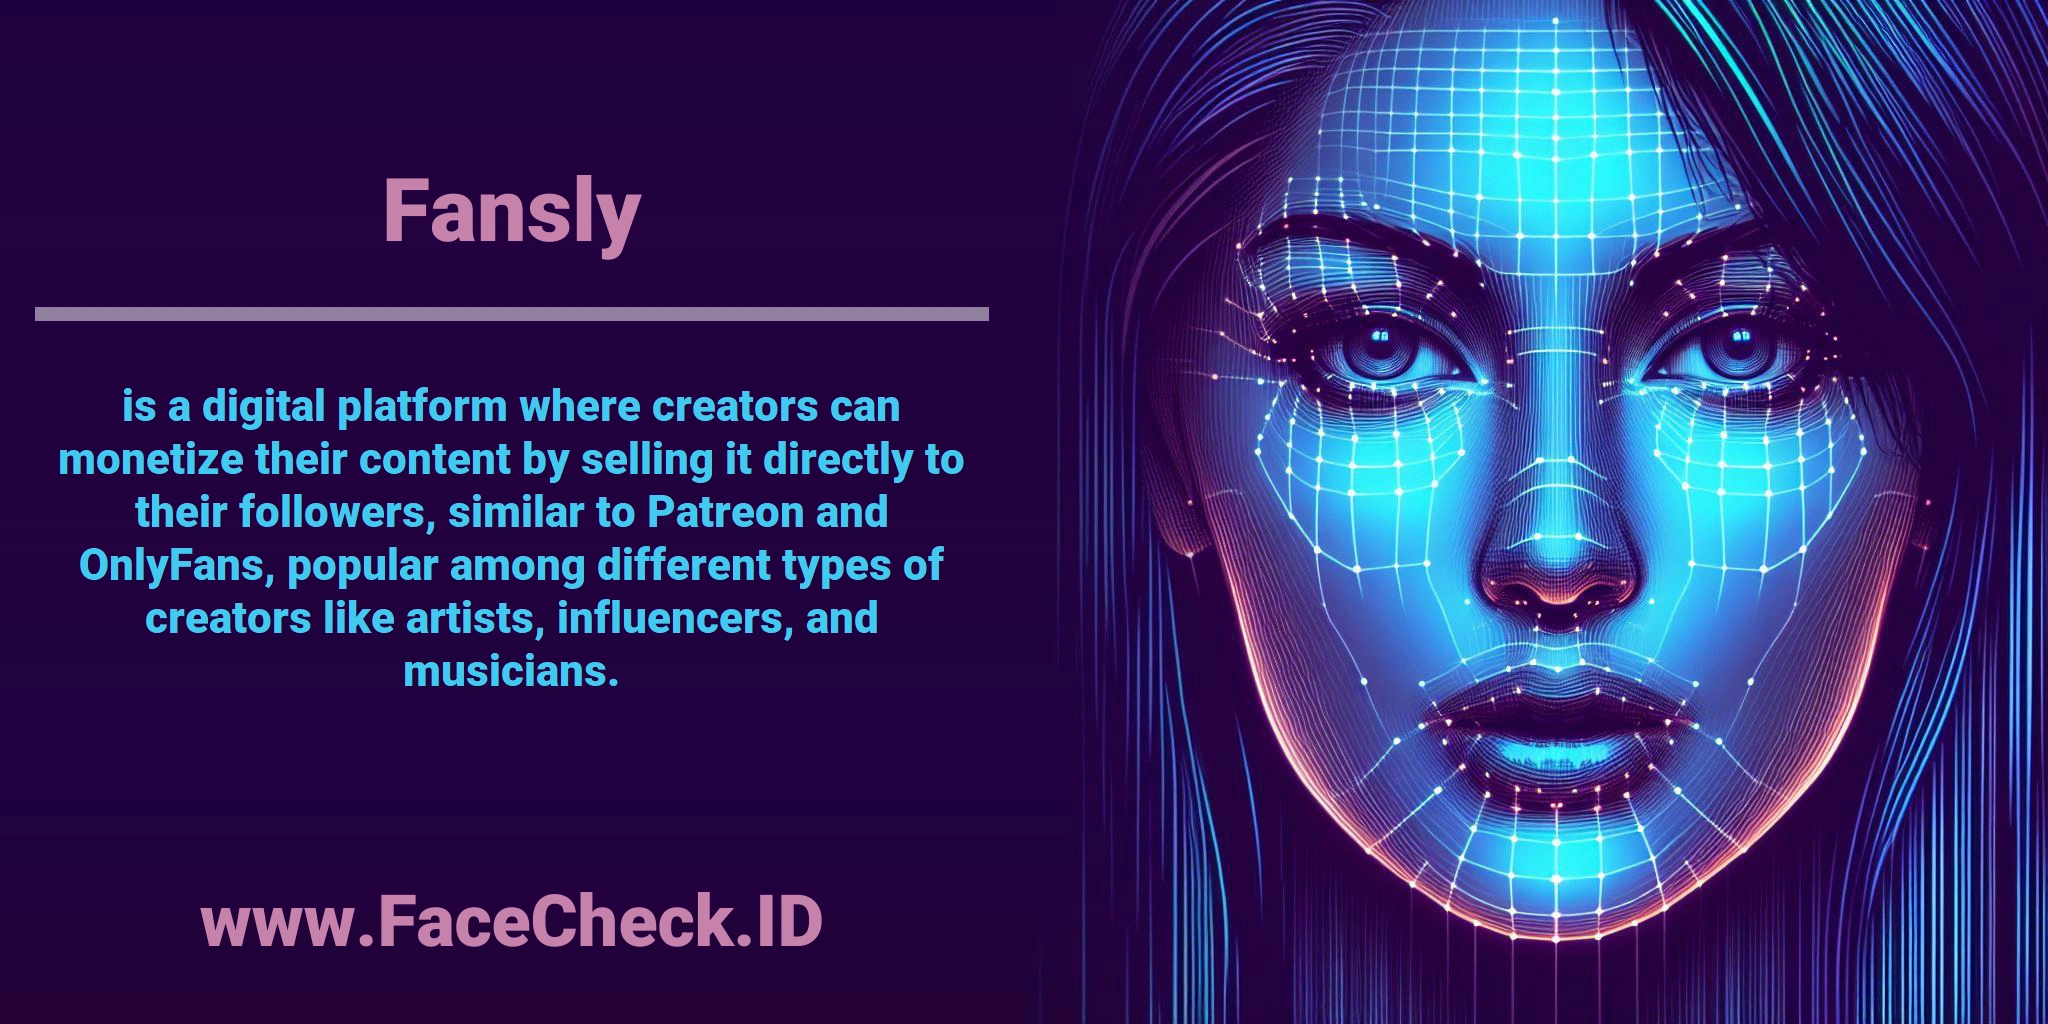 <b>Fansly</b> is a digital platform where creators can monetize their content by selling it directly to their followers, similar to Patreon and OnlyFans, popular among different types of creators like artists, influencers, and musicians.